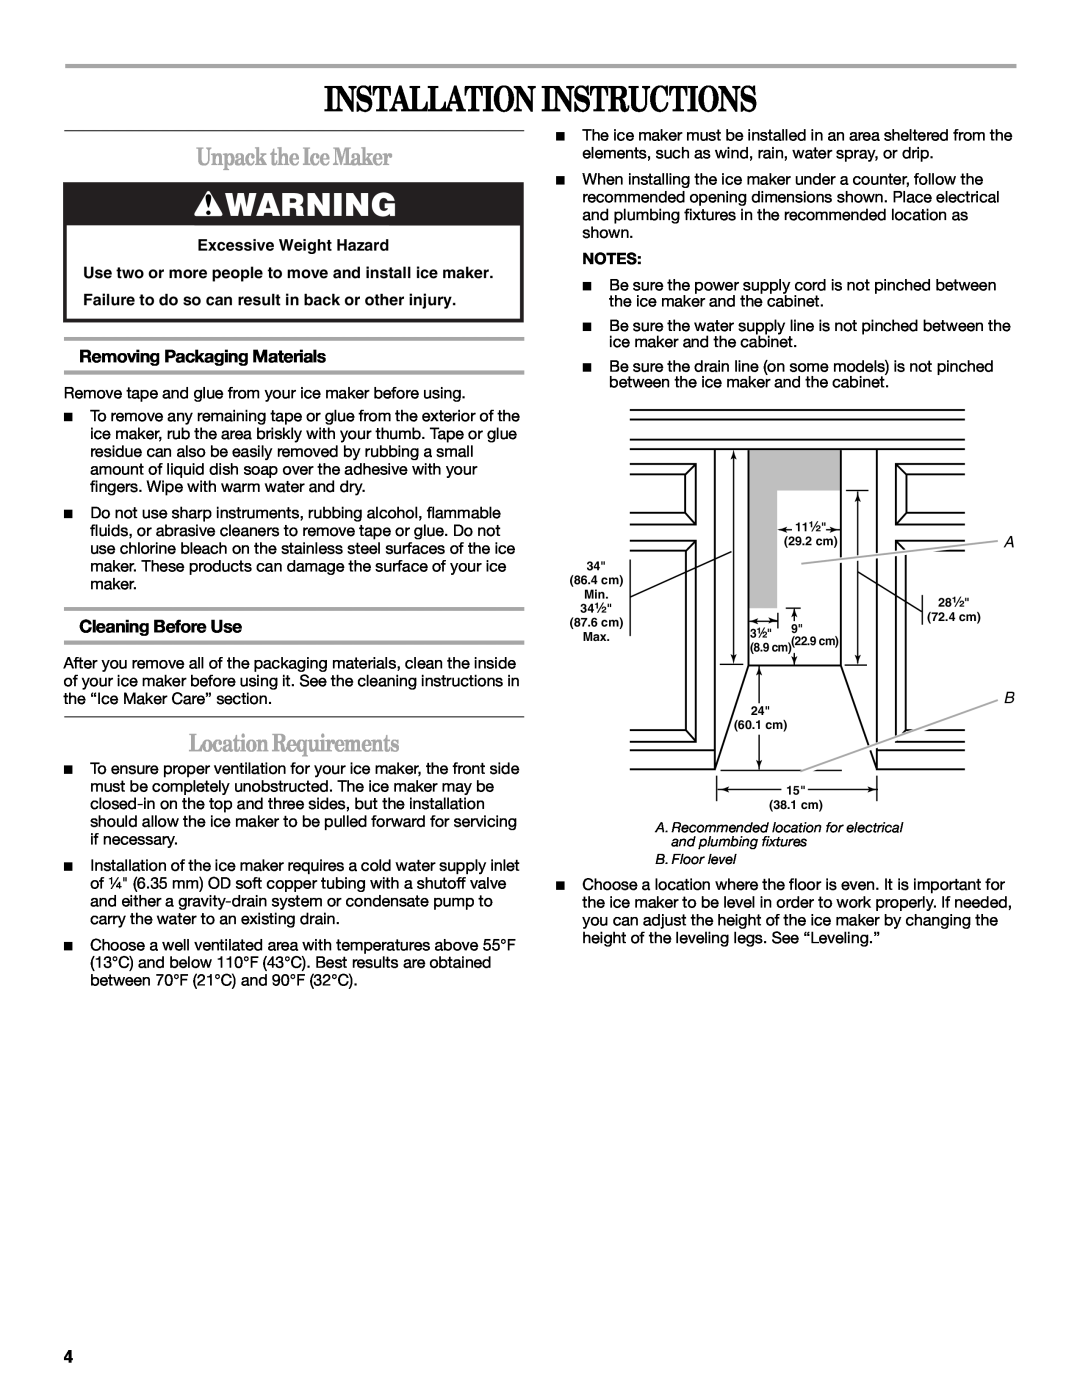 Whirlpool W10206421B Installation Instructions, Unpack the IceMaker, LocationRequirements, Removing Packaging Materials 